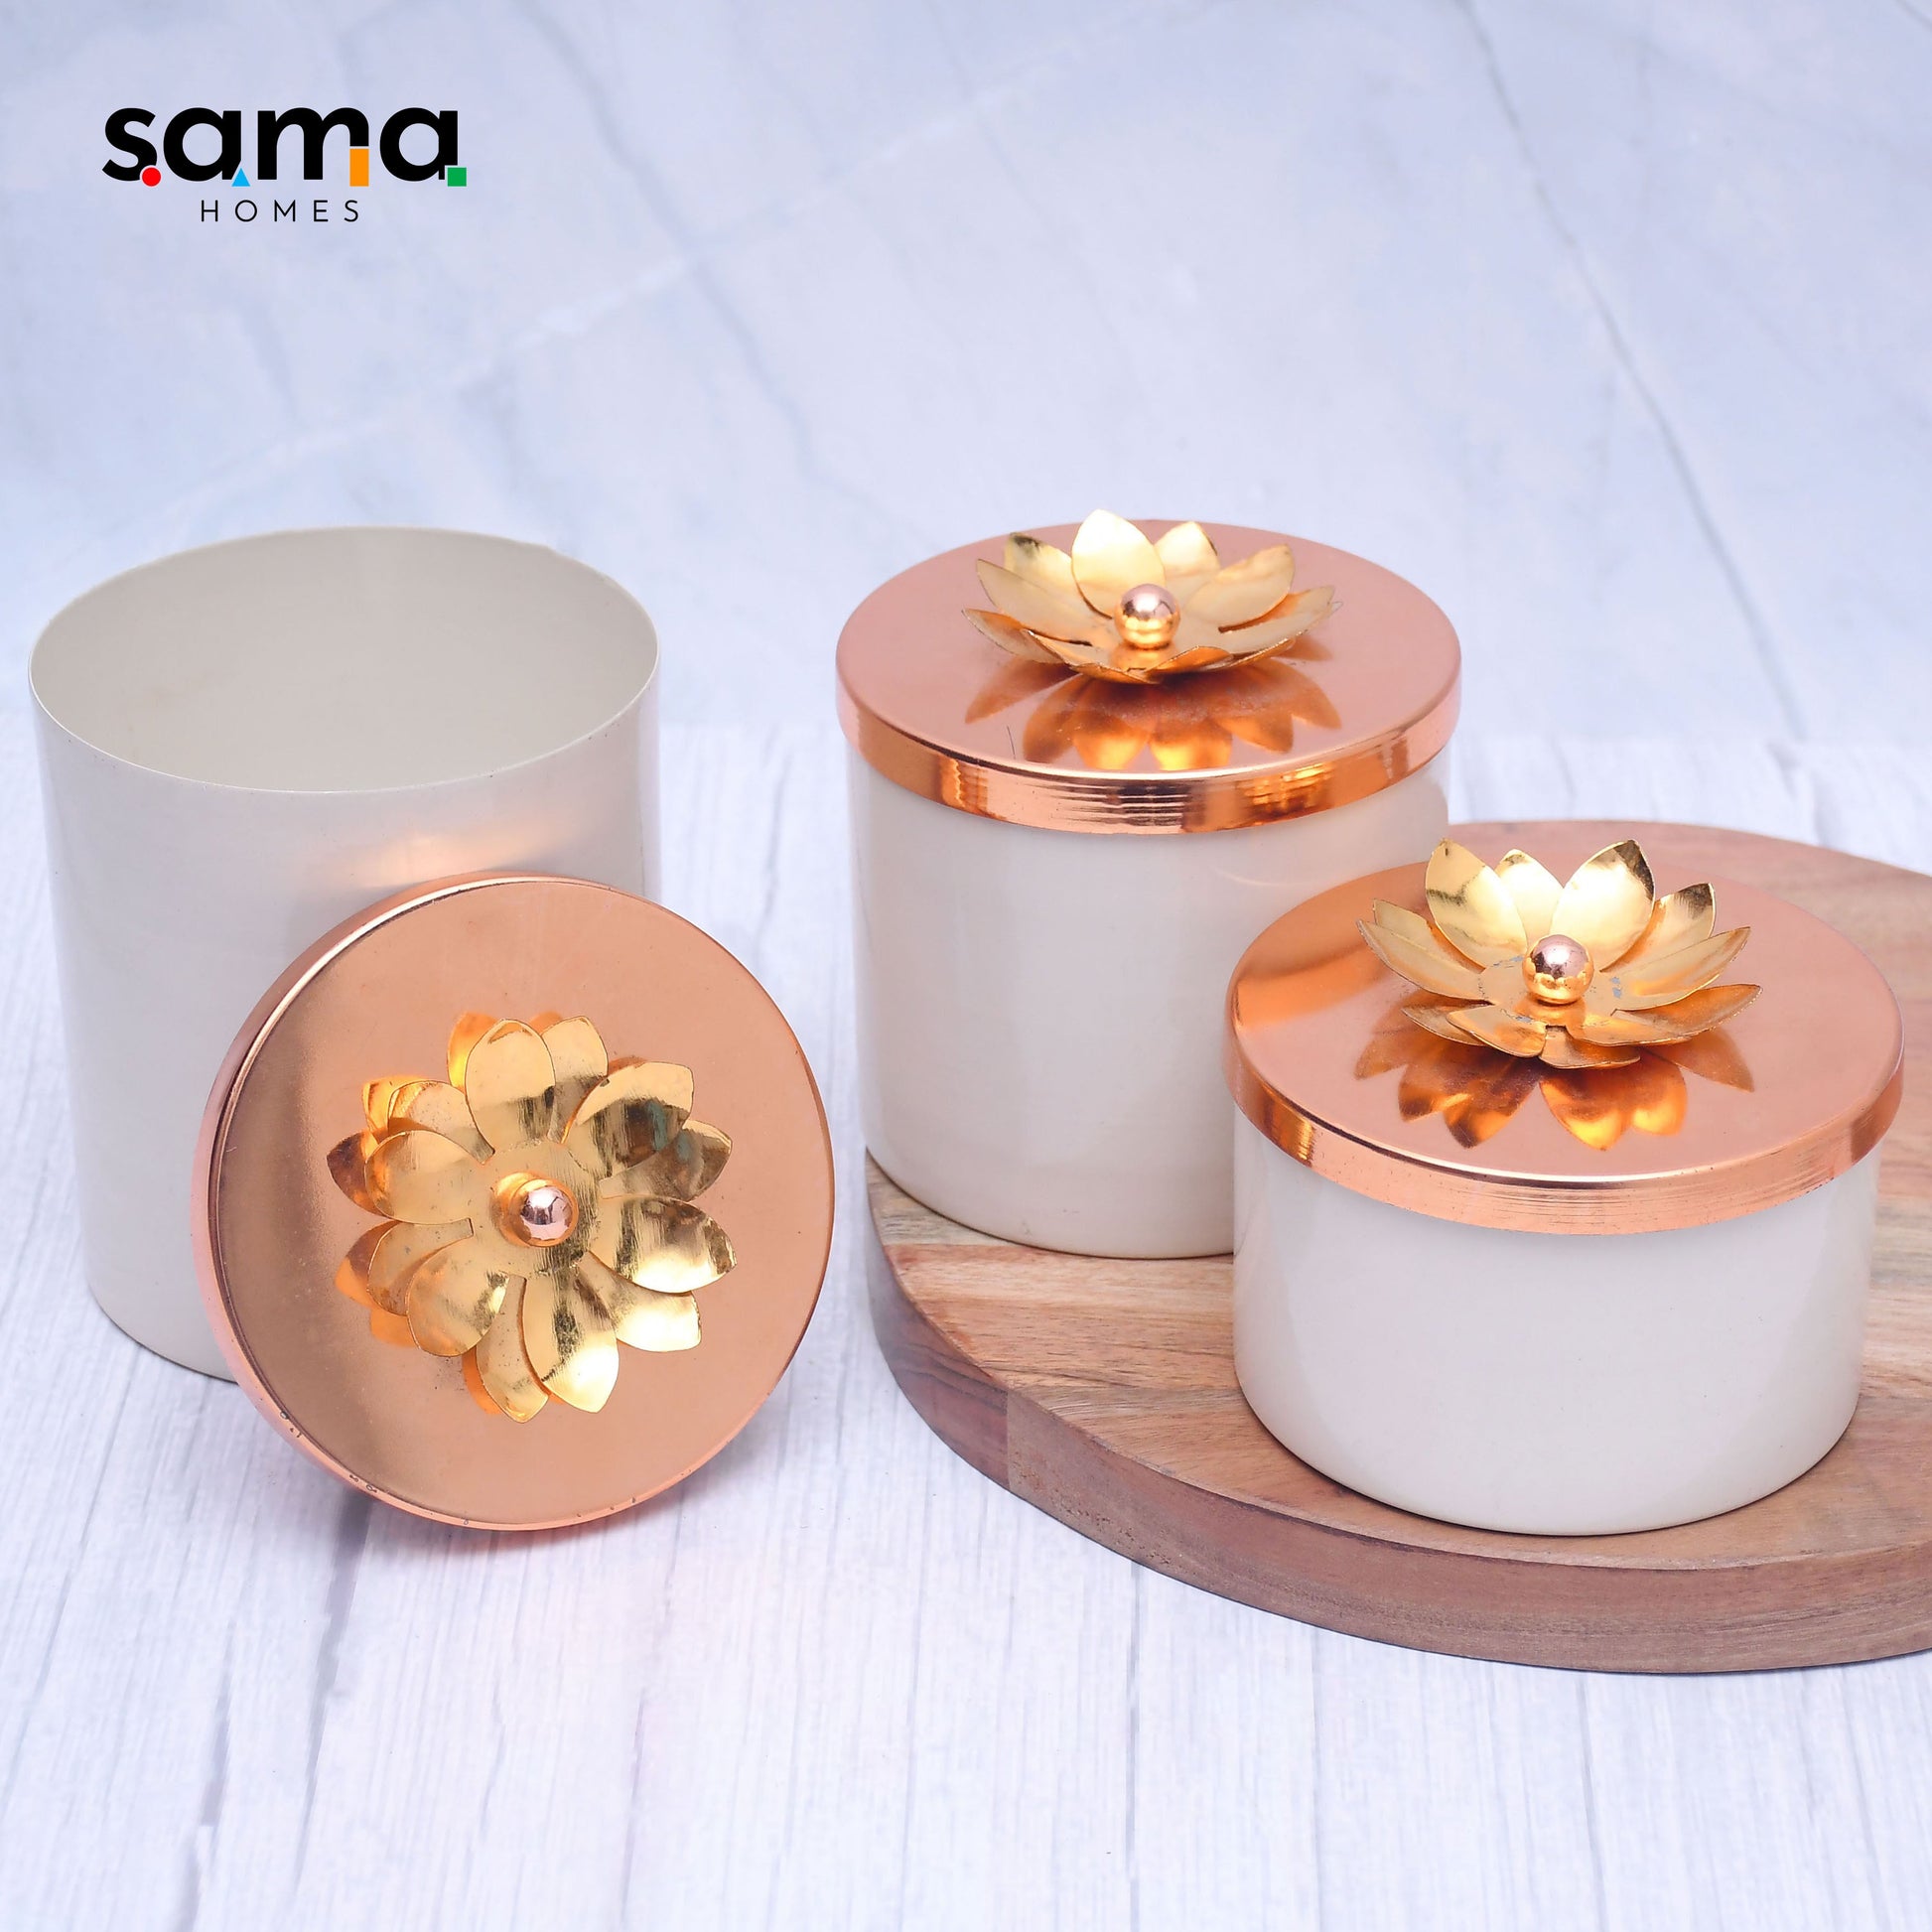 SAMA Homes - exclusive dryfruits jar containers for home kitchen storage box set of 3